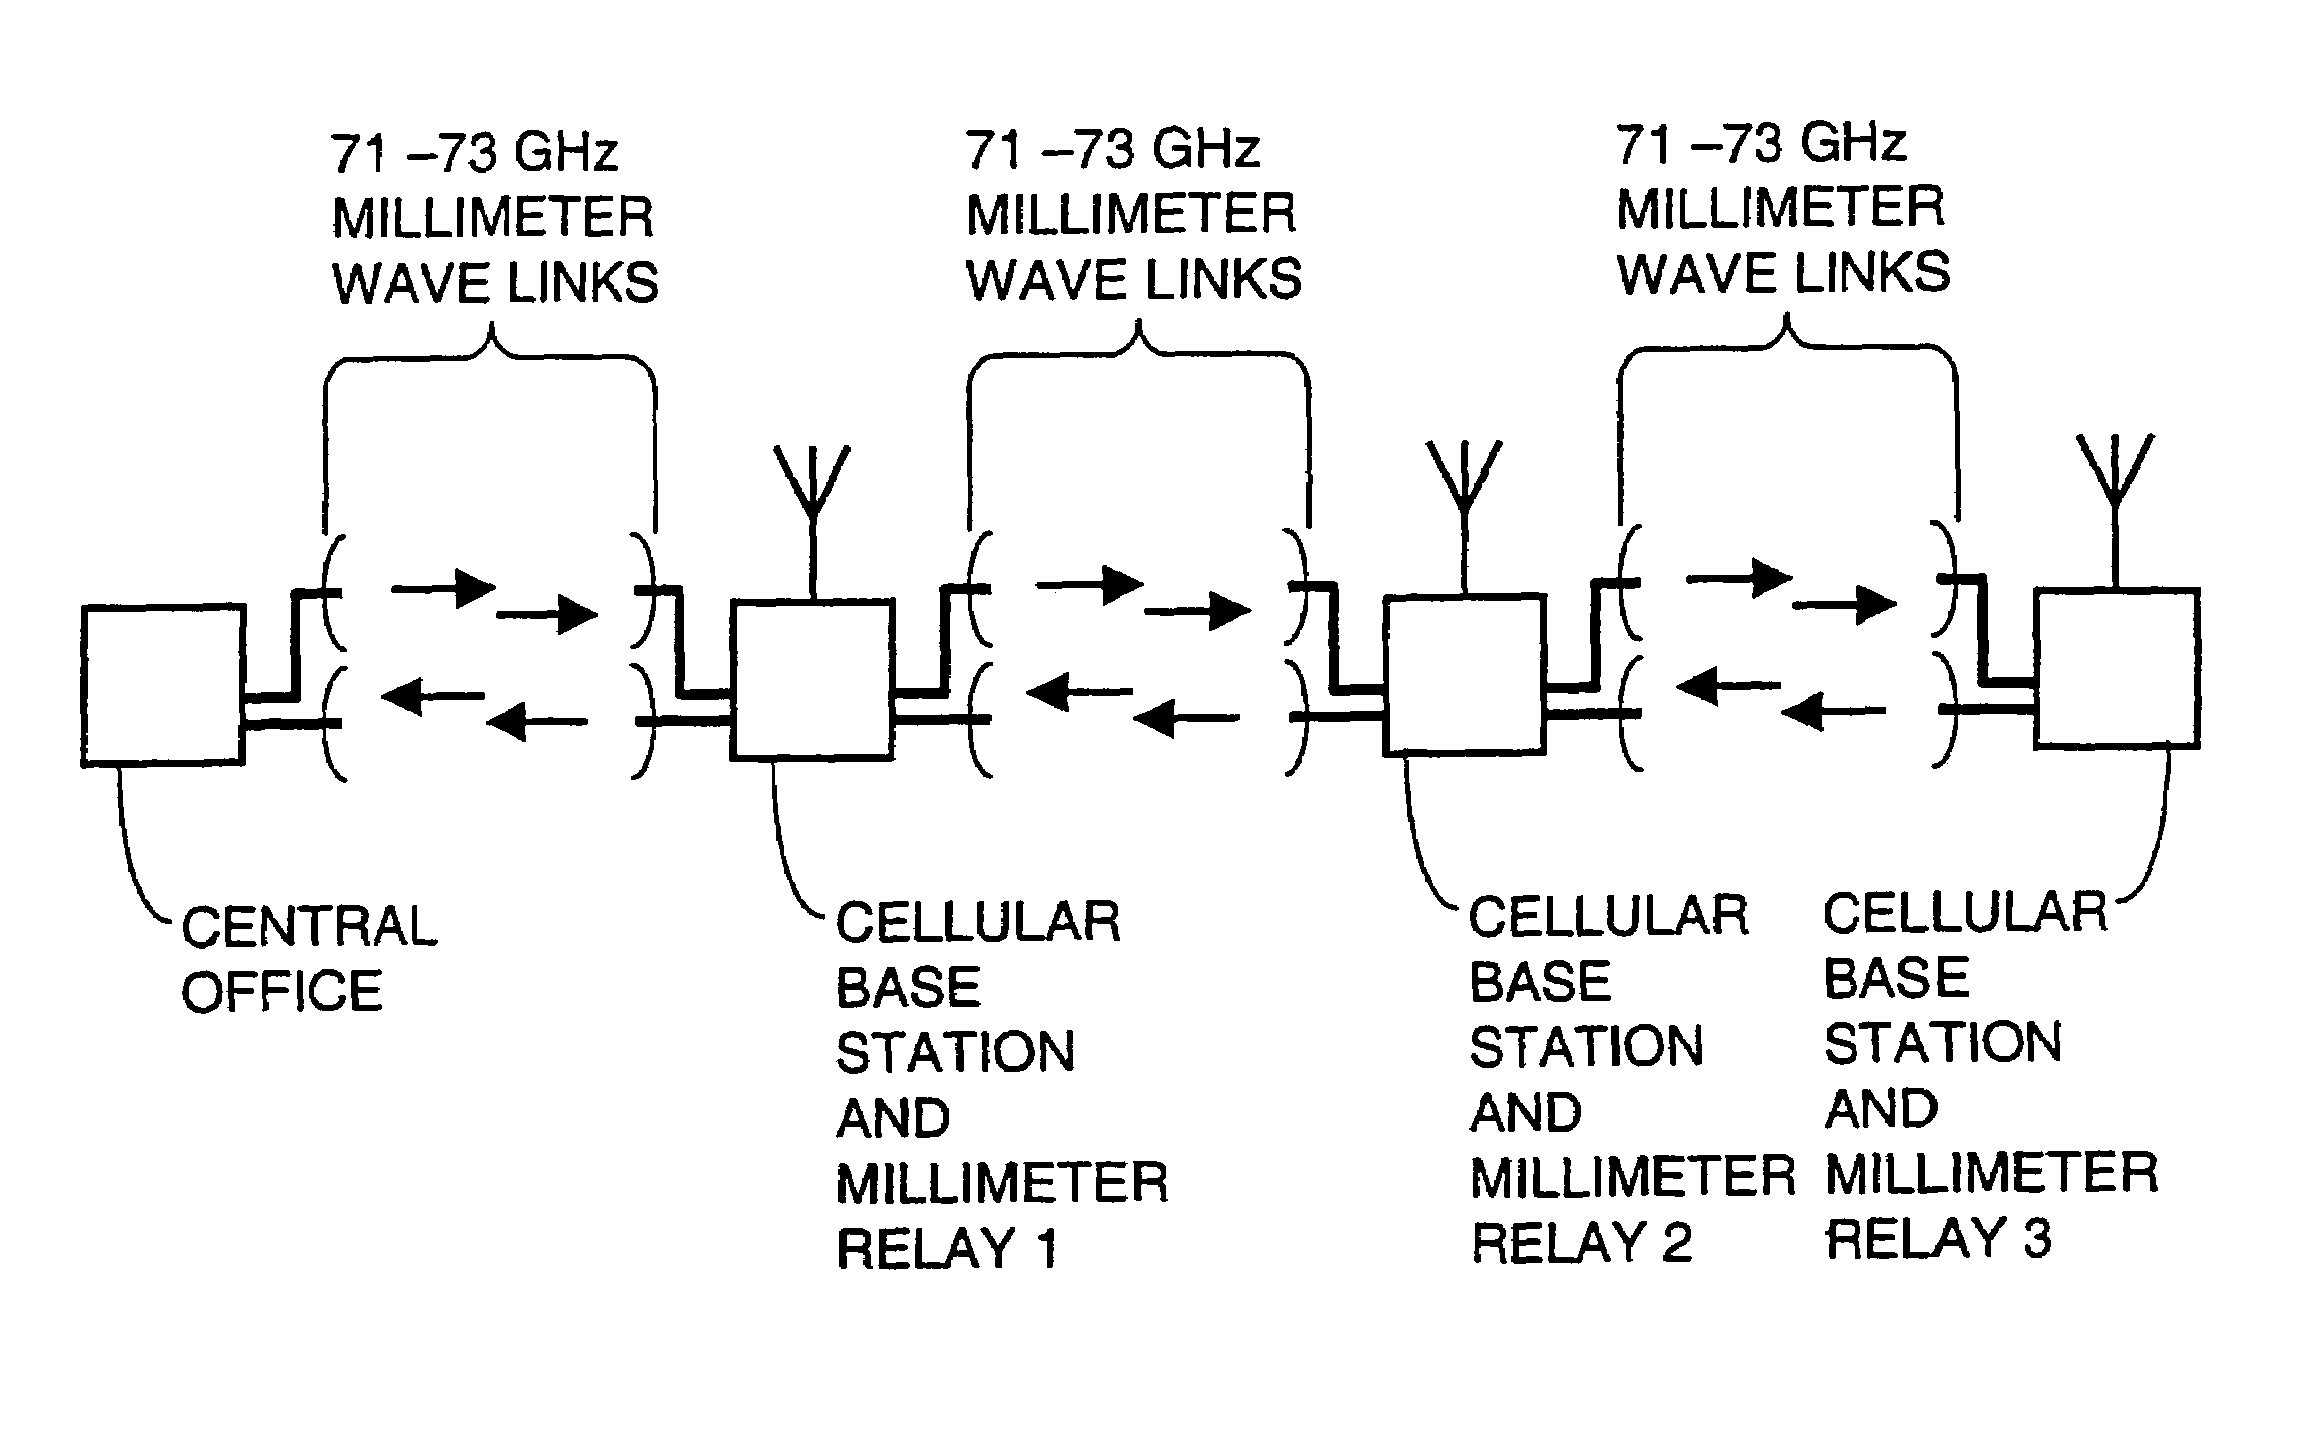 Cellular telephone system with free space millimeter wave trunk line